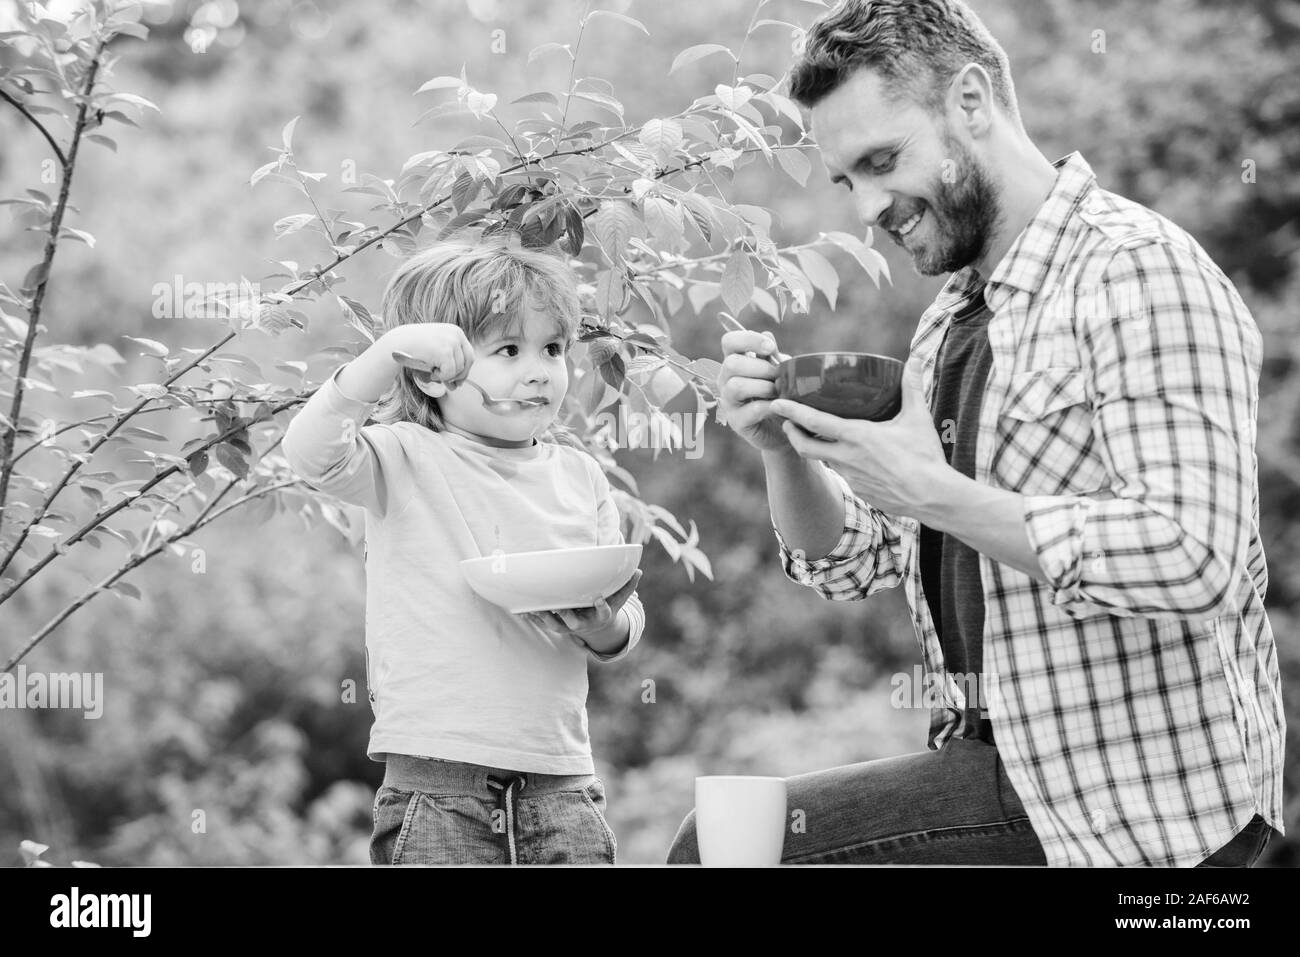 Healthy nutrition concept. Nutrition habits. Family enjoy homemade meal. Healthy breakfast. Father son eat food. Little boy and dad eat. Nutrition kids and adults. Tasty porridge. Organic nutrition. Stock Photo